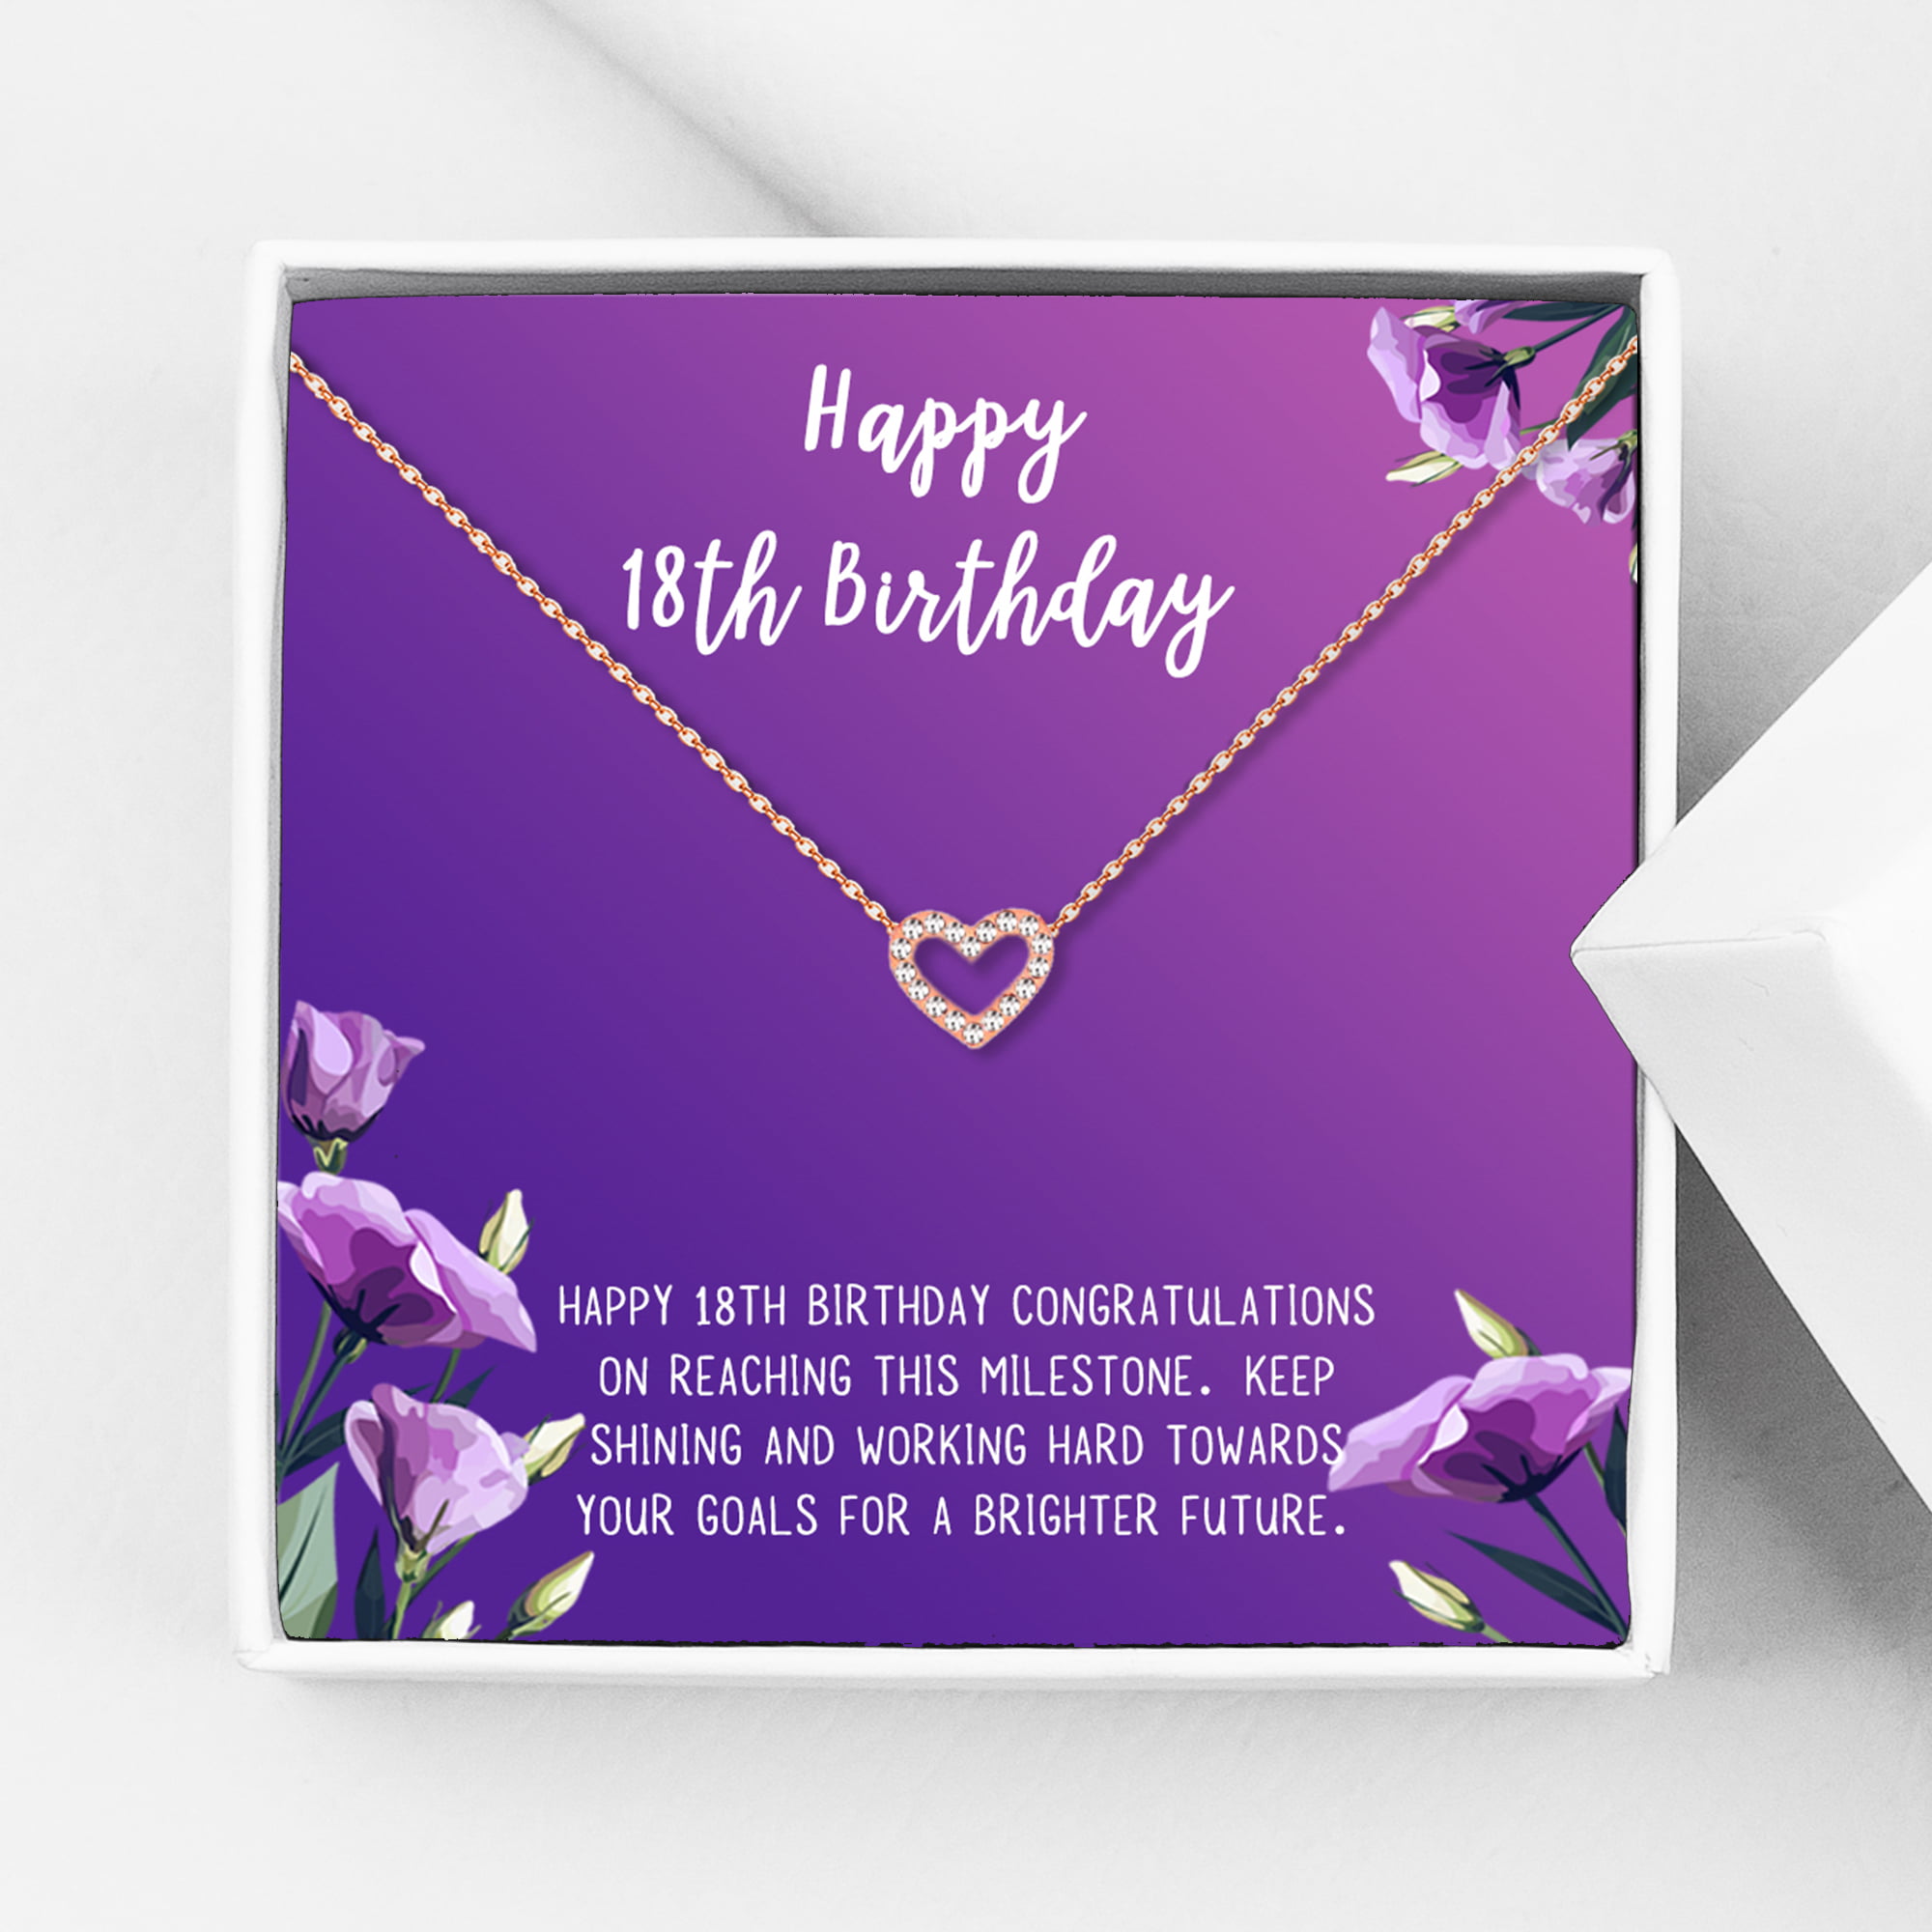 Details about   PERSONALISED HANDMADE BIRTHDAY CARD 18th 21st 40th DAUGHTER SISTER GRANDDAUGHTER